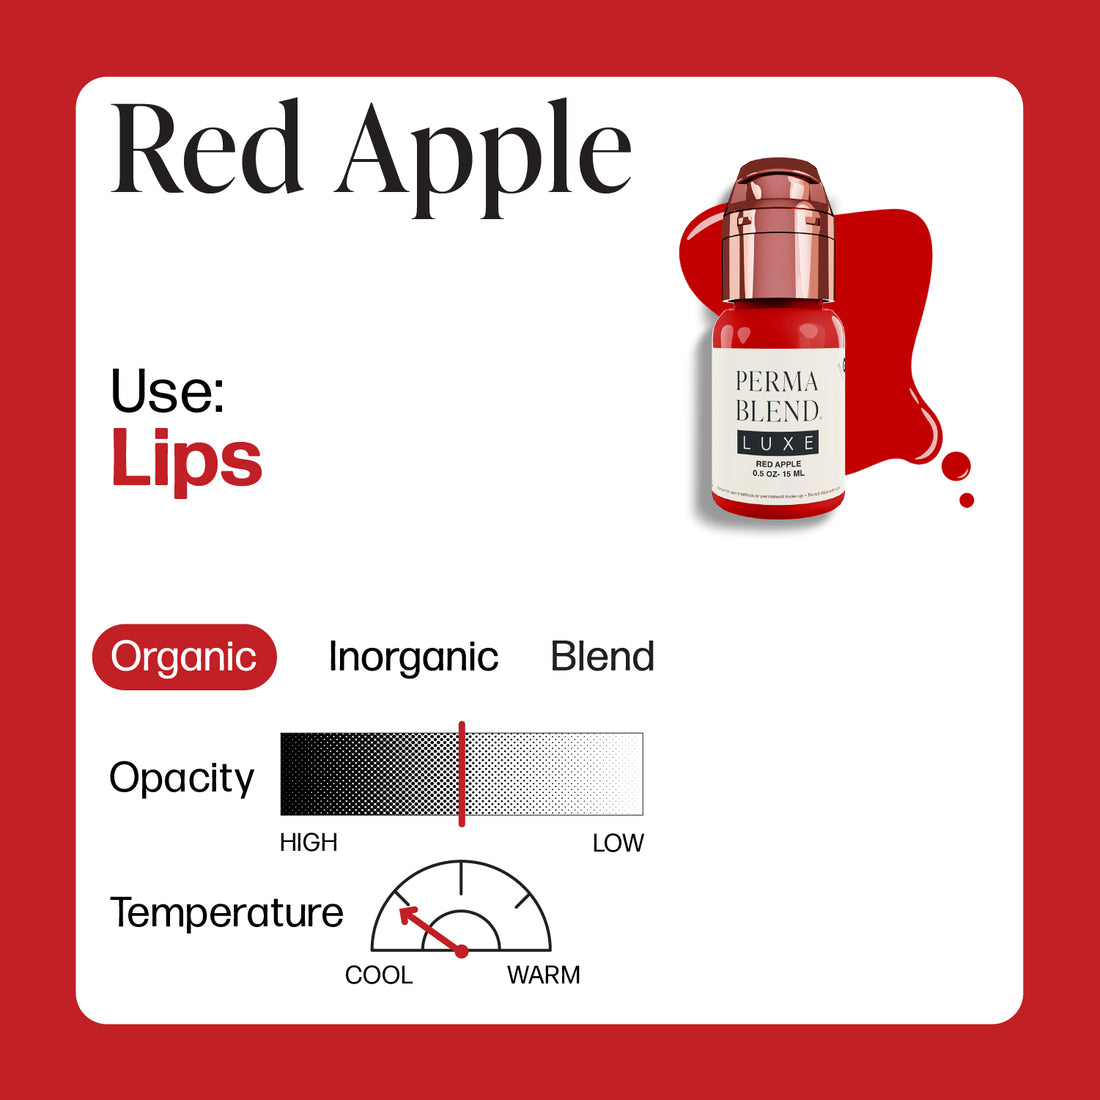 Red Apple - Perma Blend Luxe-Kallos